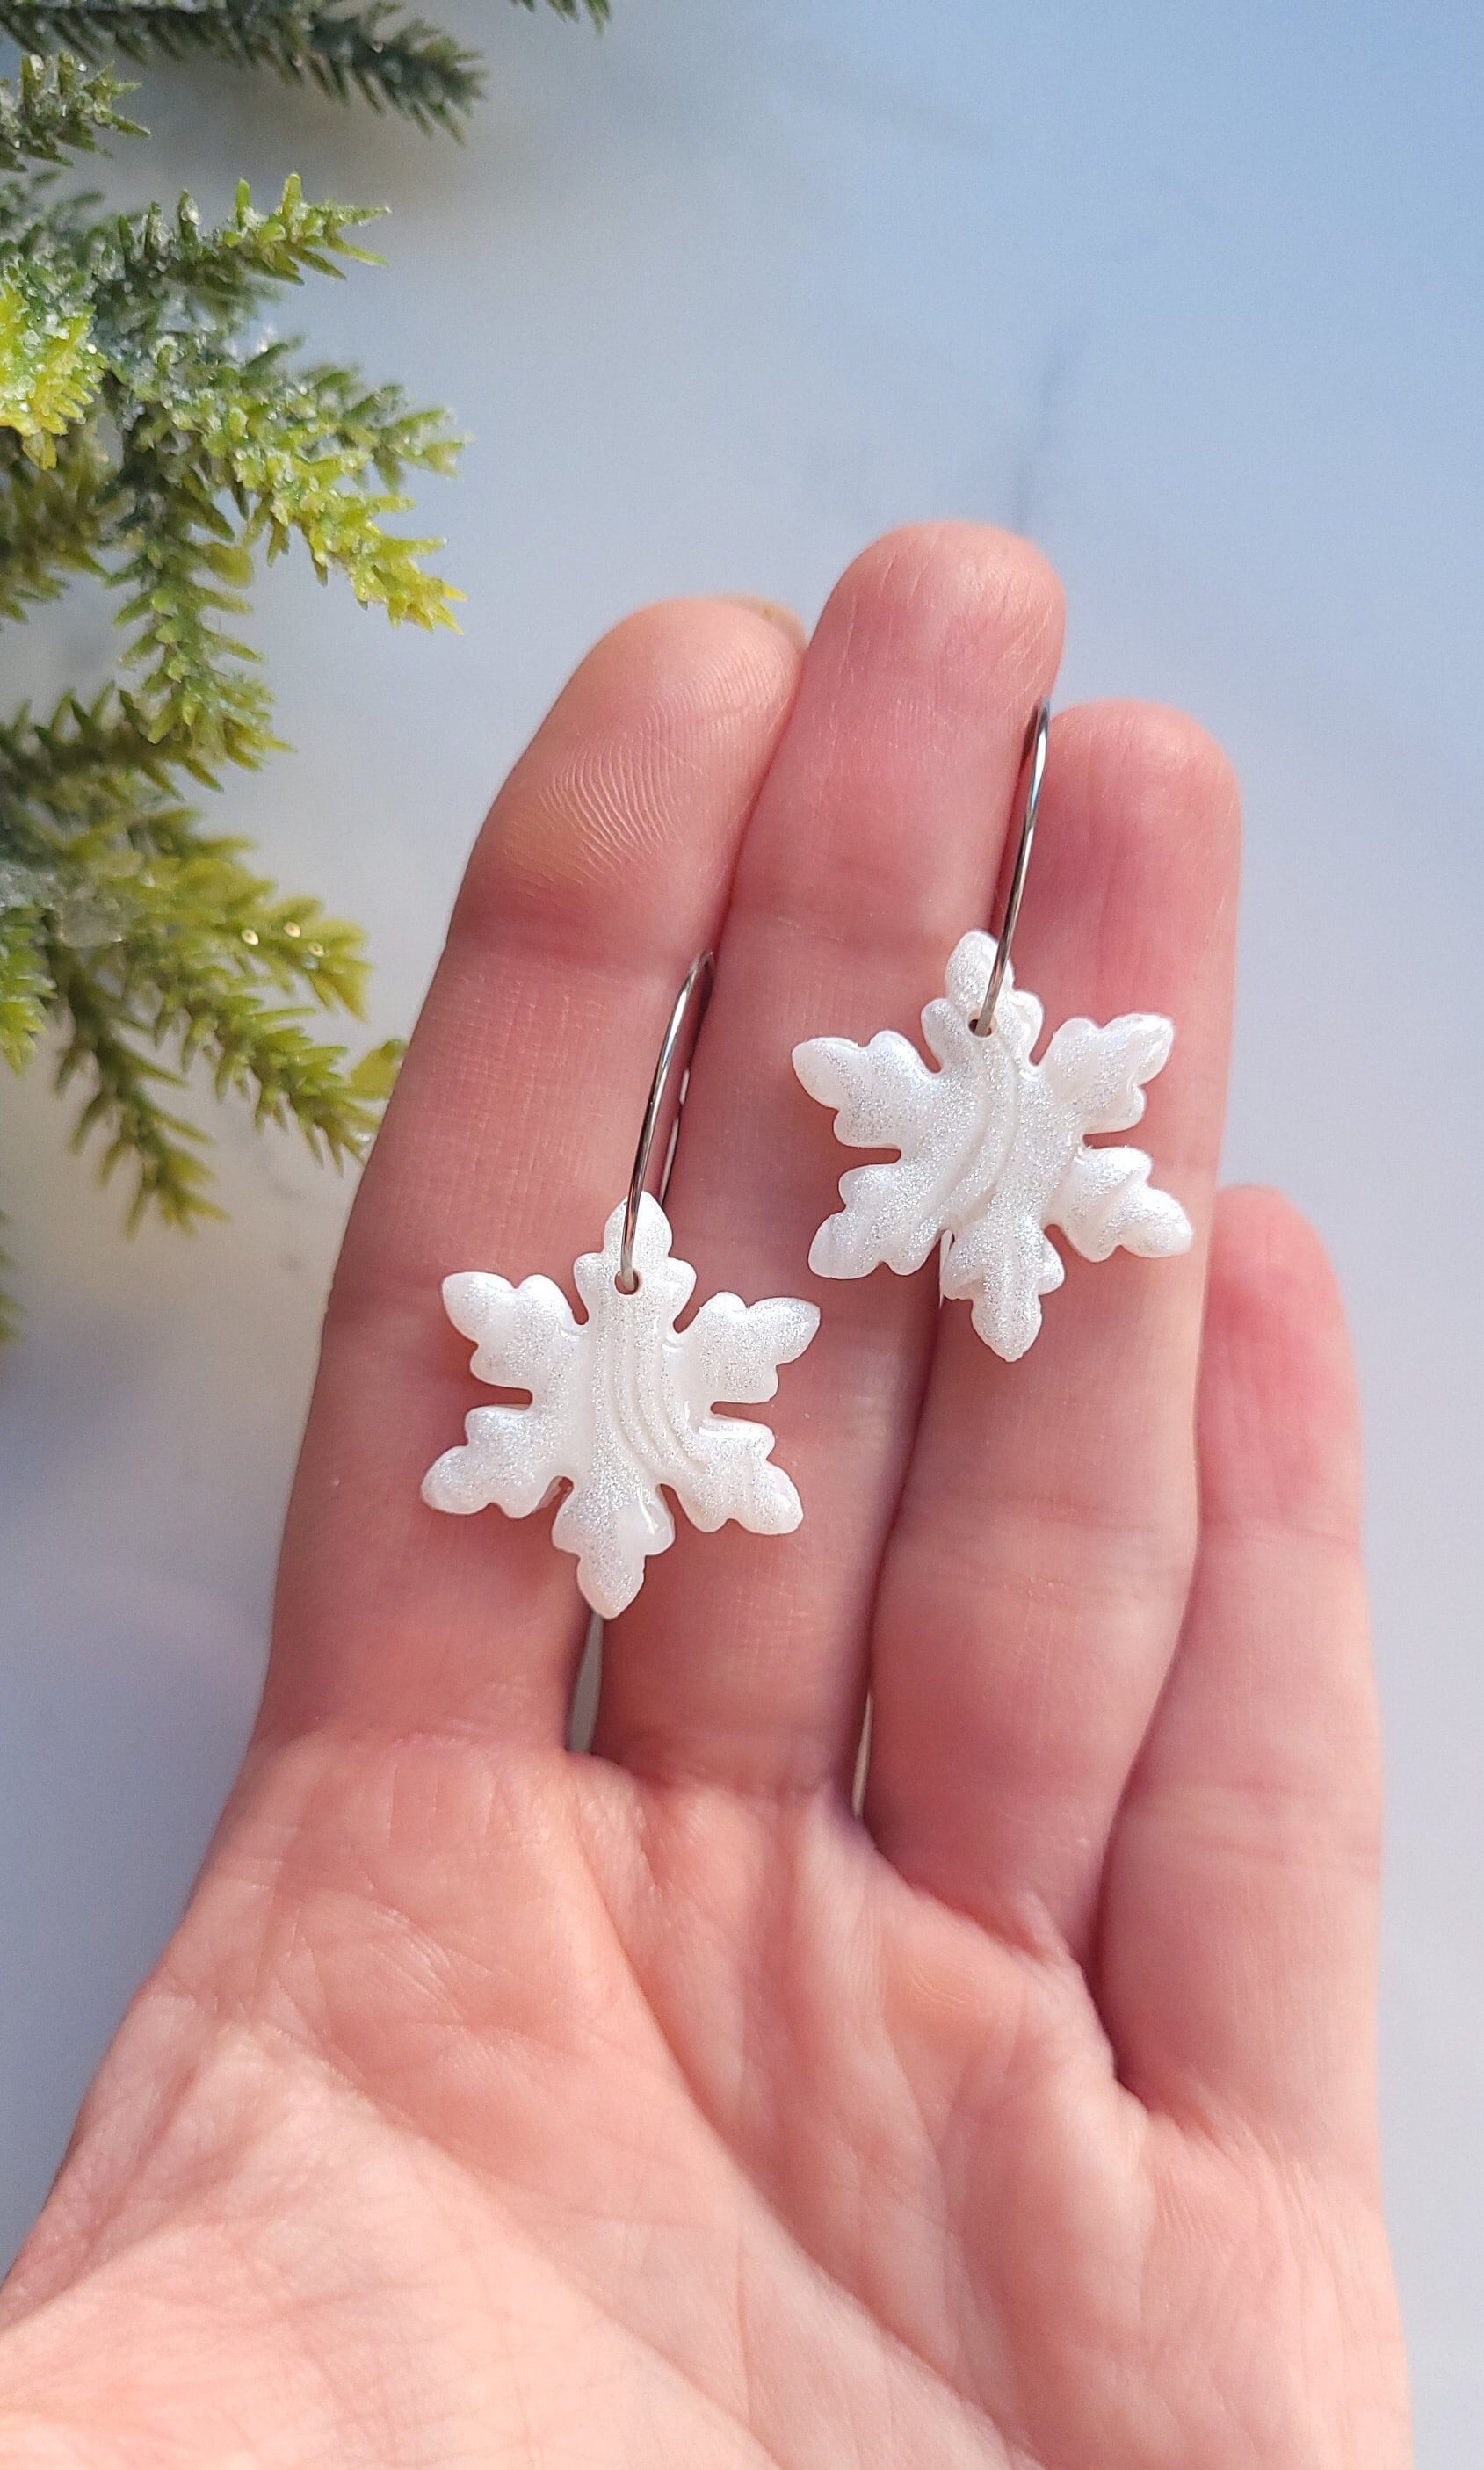 Translucent White & Silver Marble Earrings | Handmade Polymer Clay Statement Snowflake Hoop